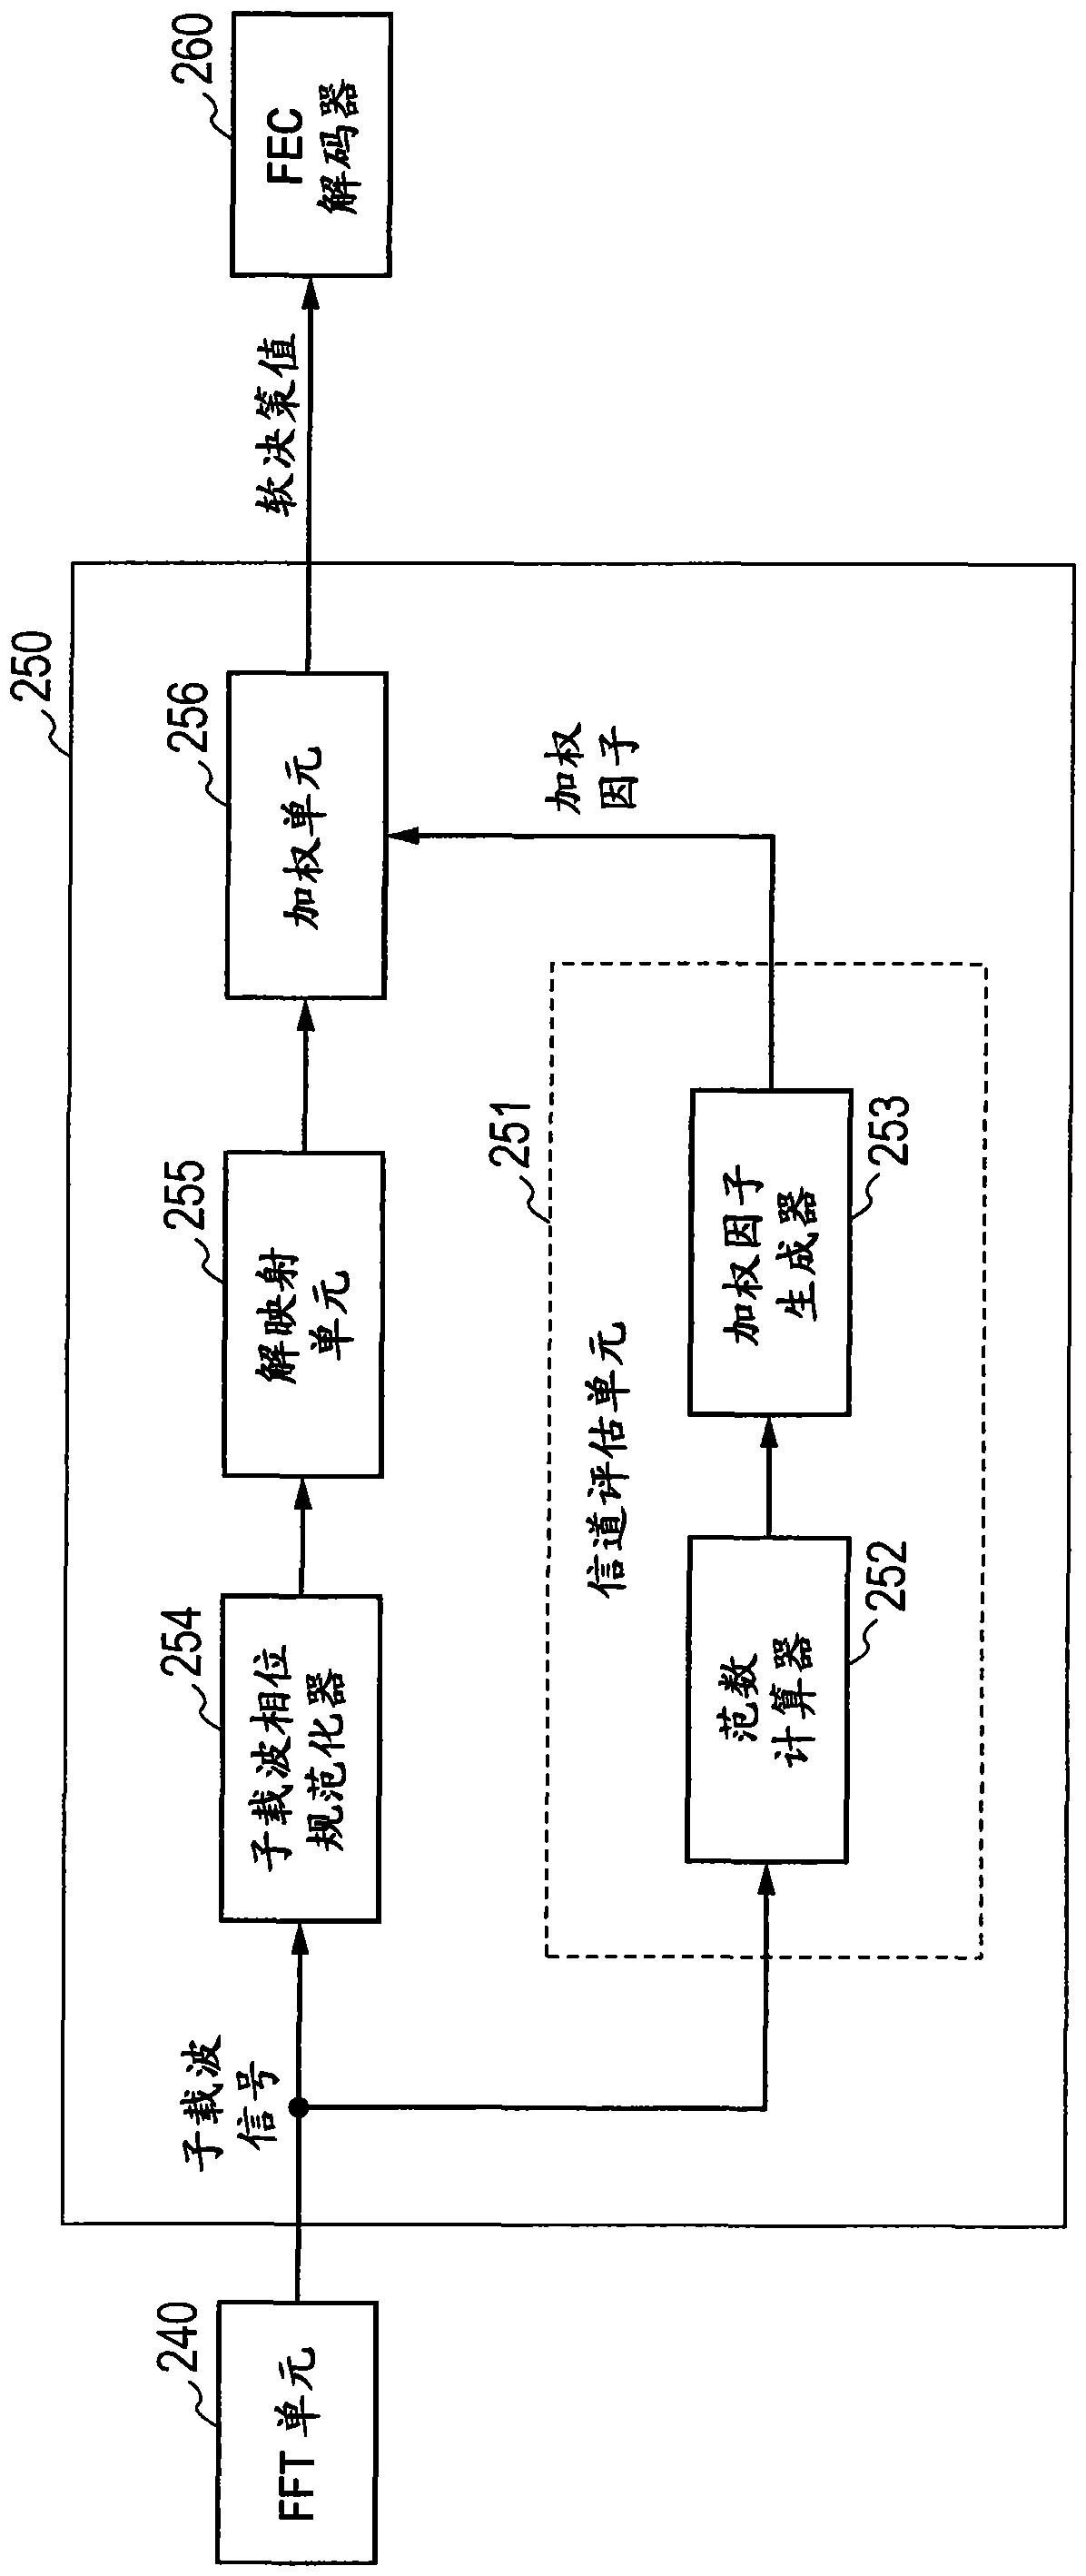 Receiving device, signal processing device and signal processing method